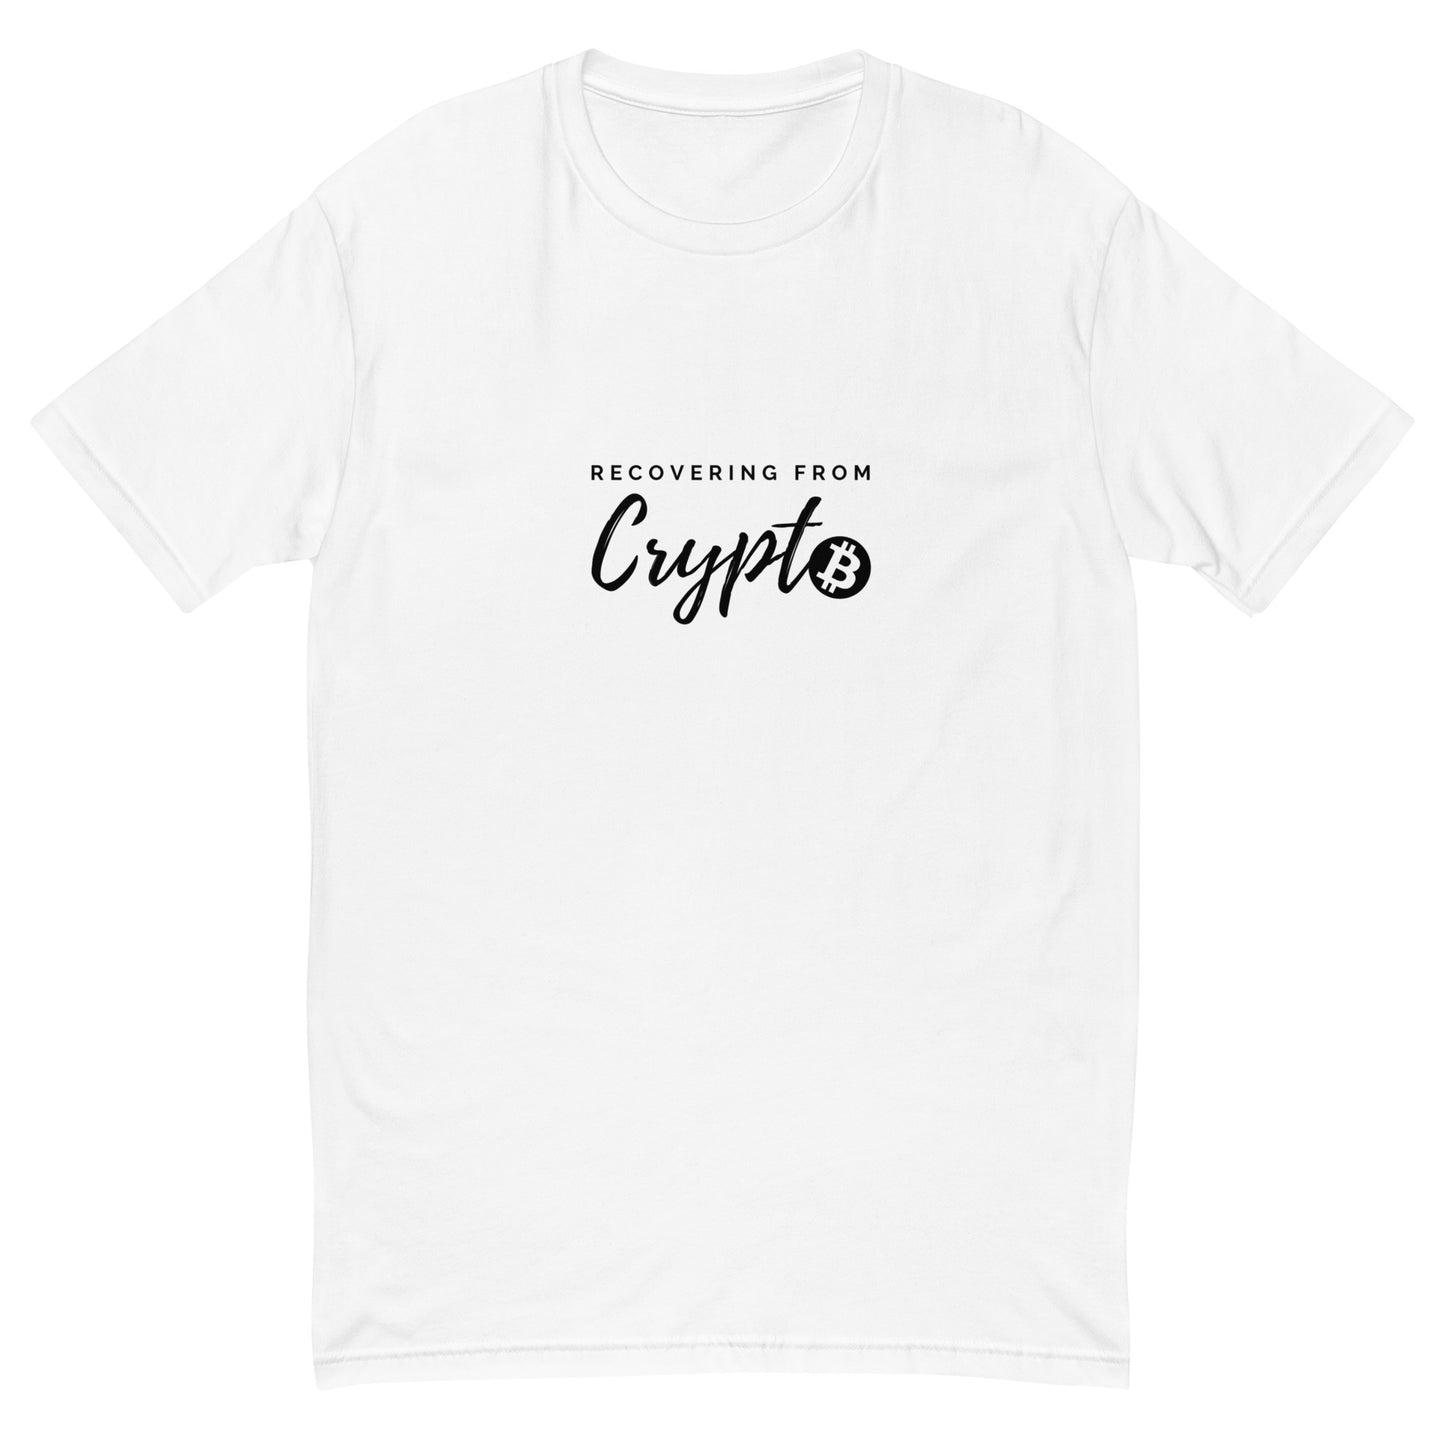 RECOVERING FROM CRYPTO T-Shirt